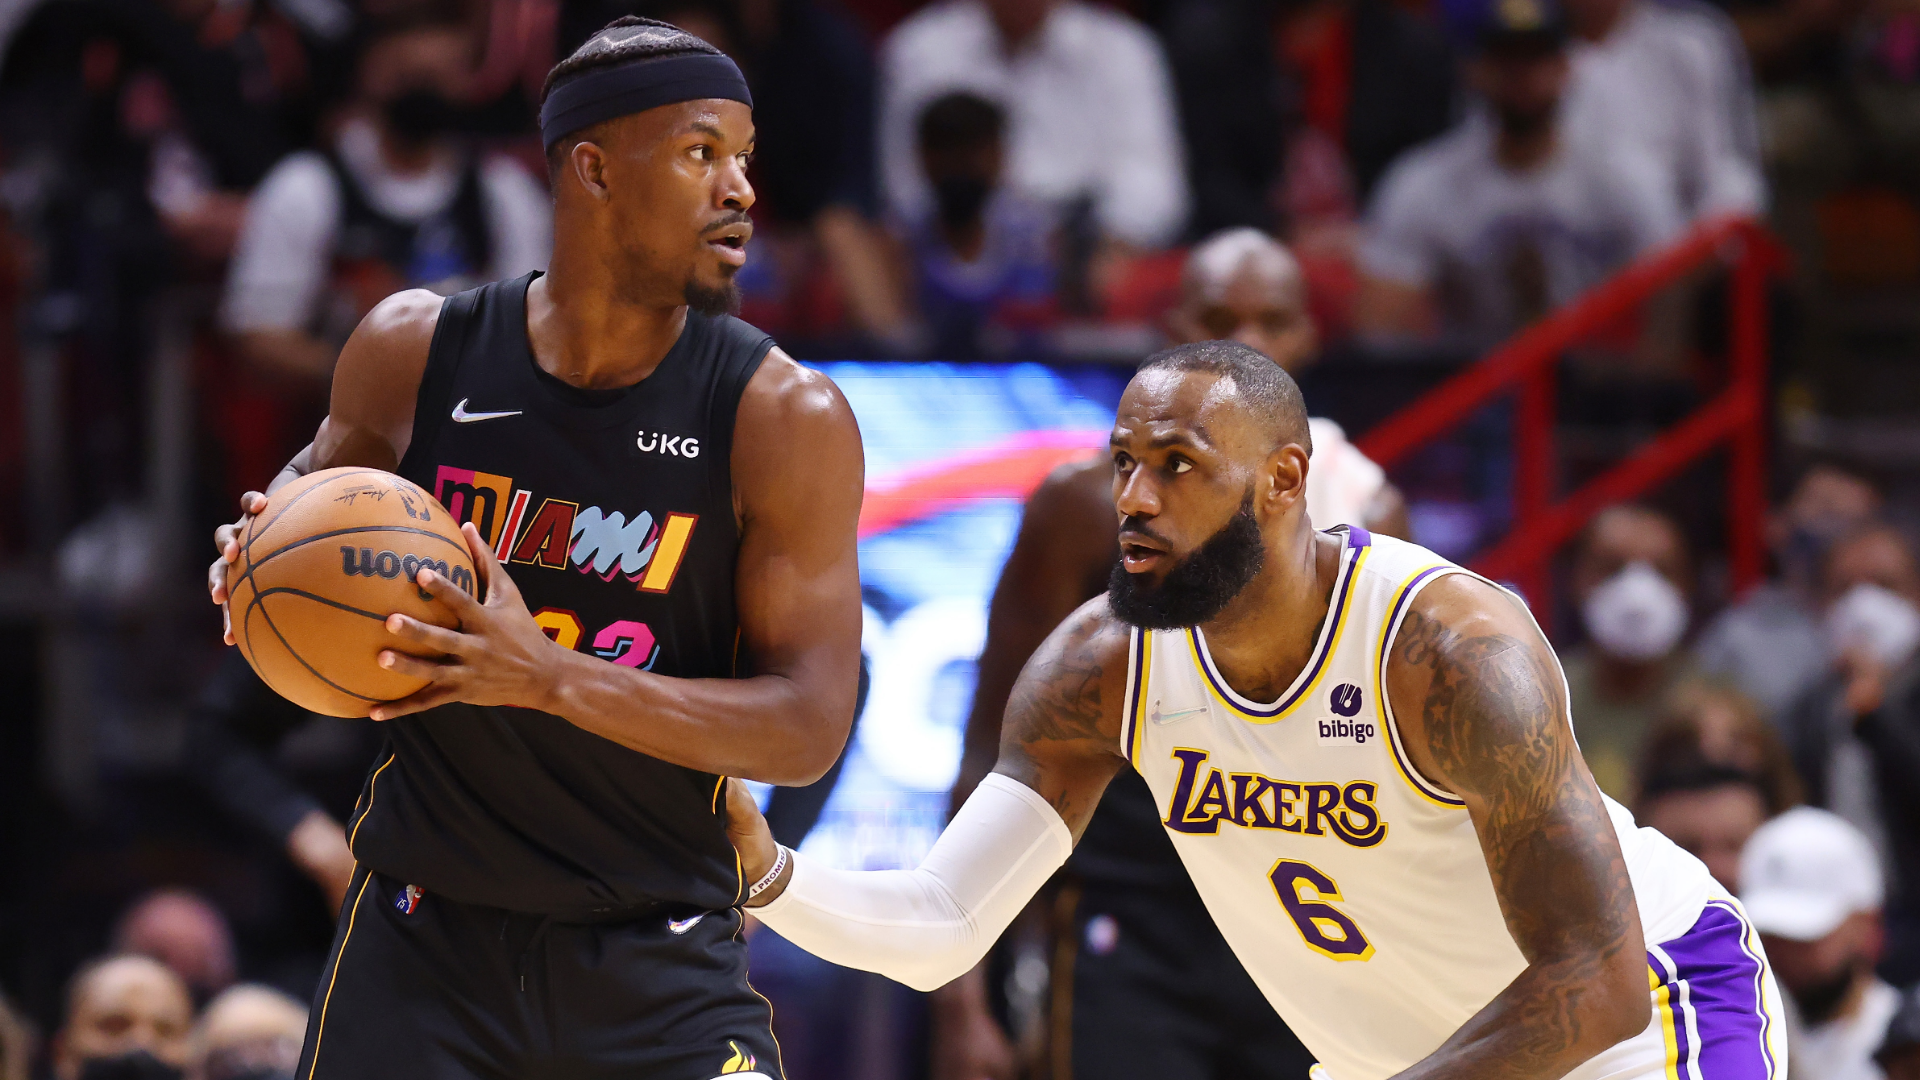 How to watch LeBron James vs. Jimmy Butler: TV channel, live streams, time for Lakers vs. Heat Wednesday NBA game